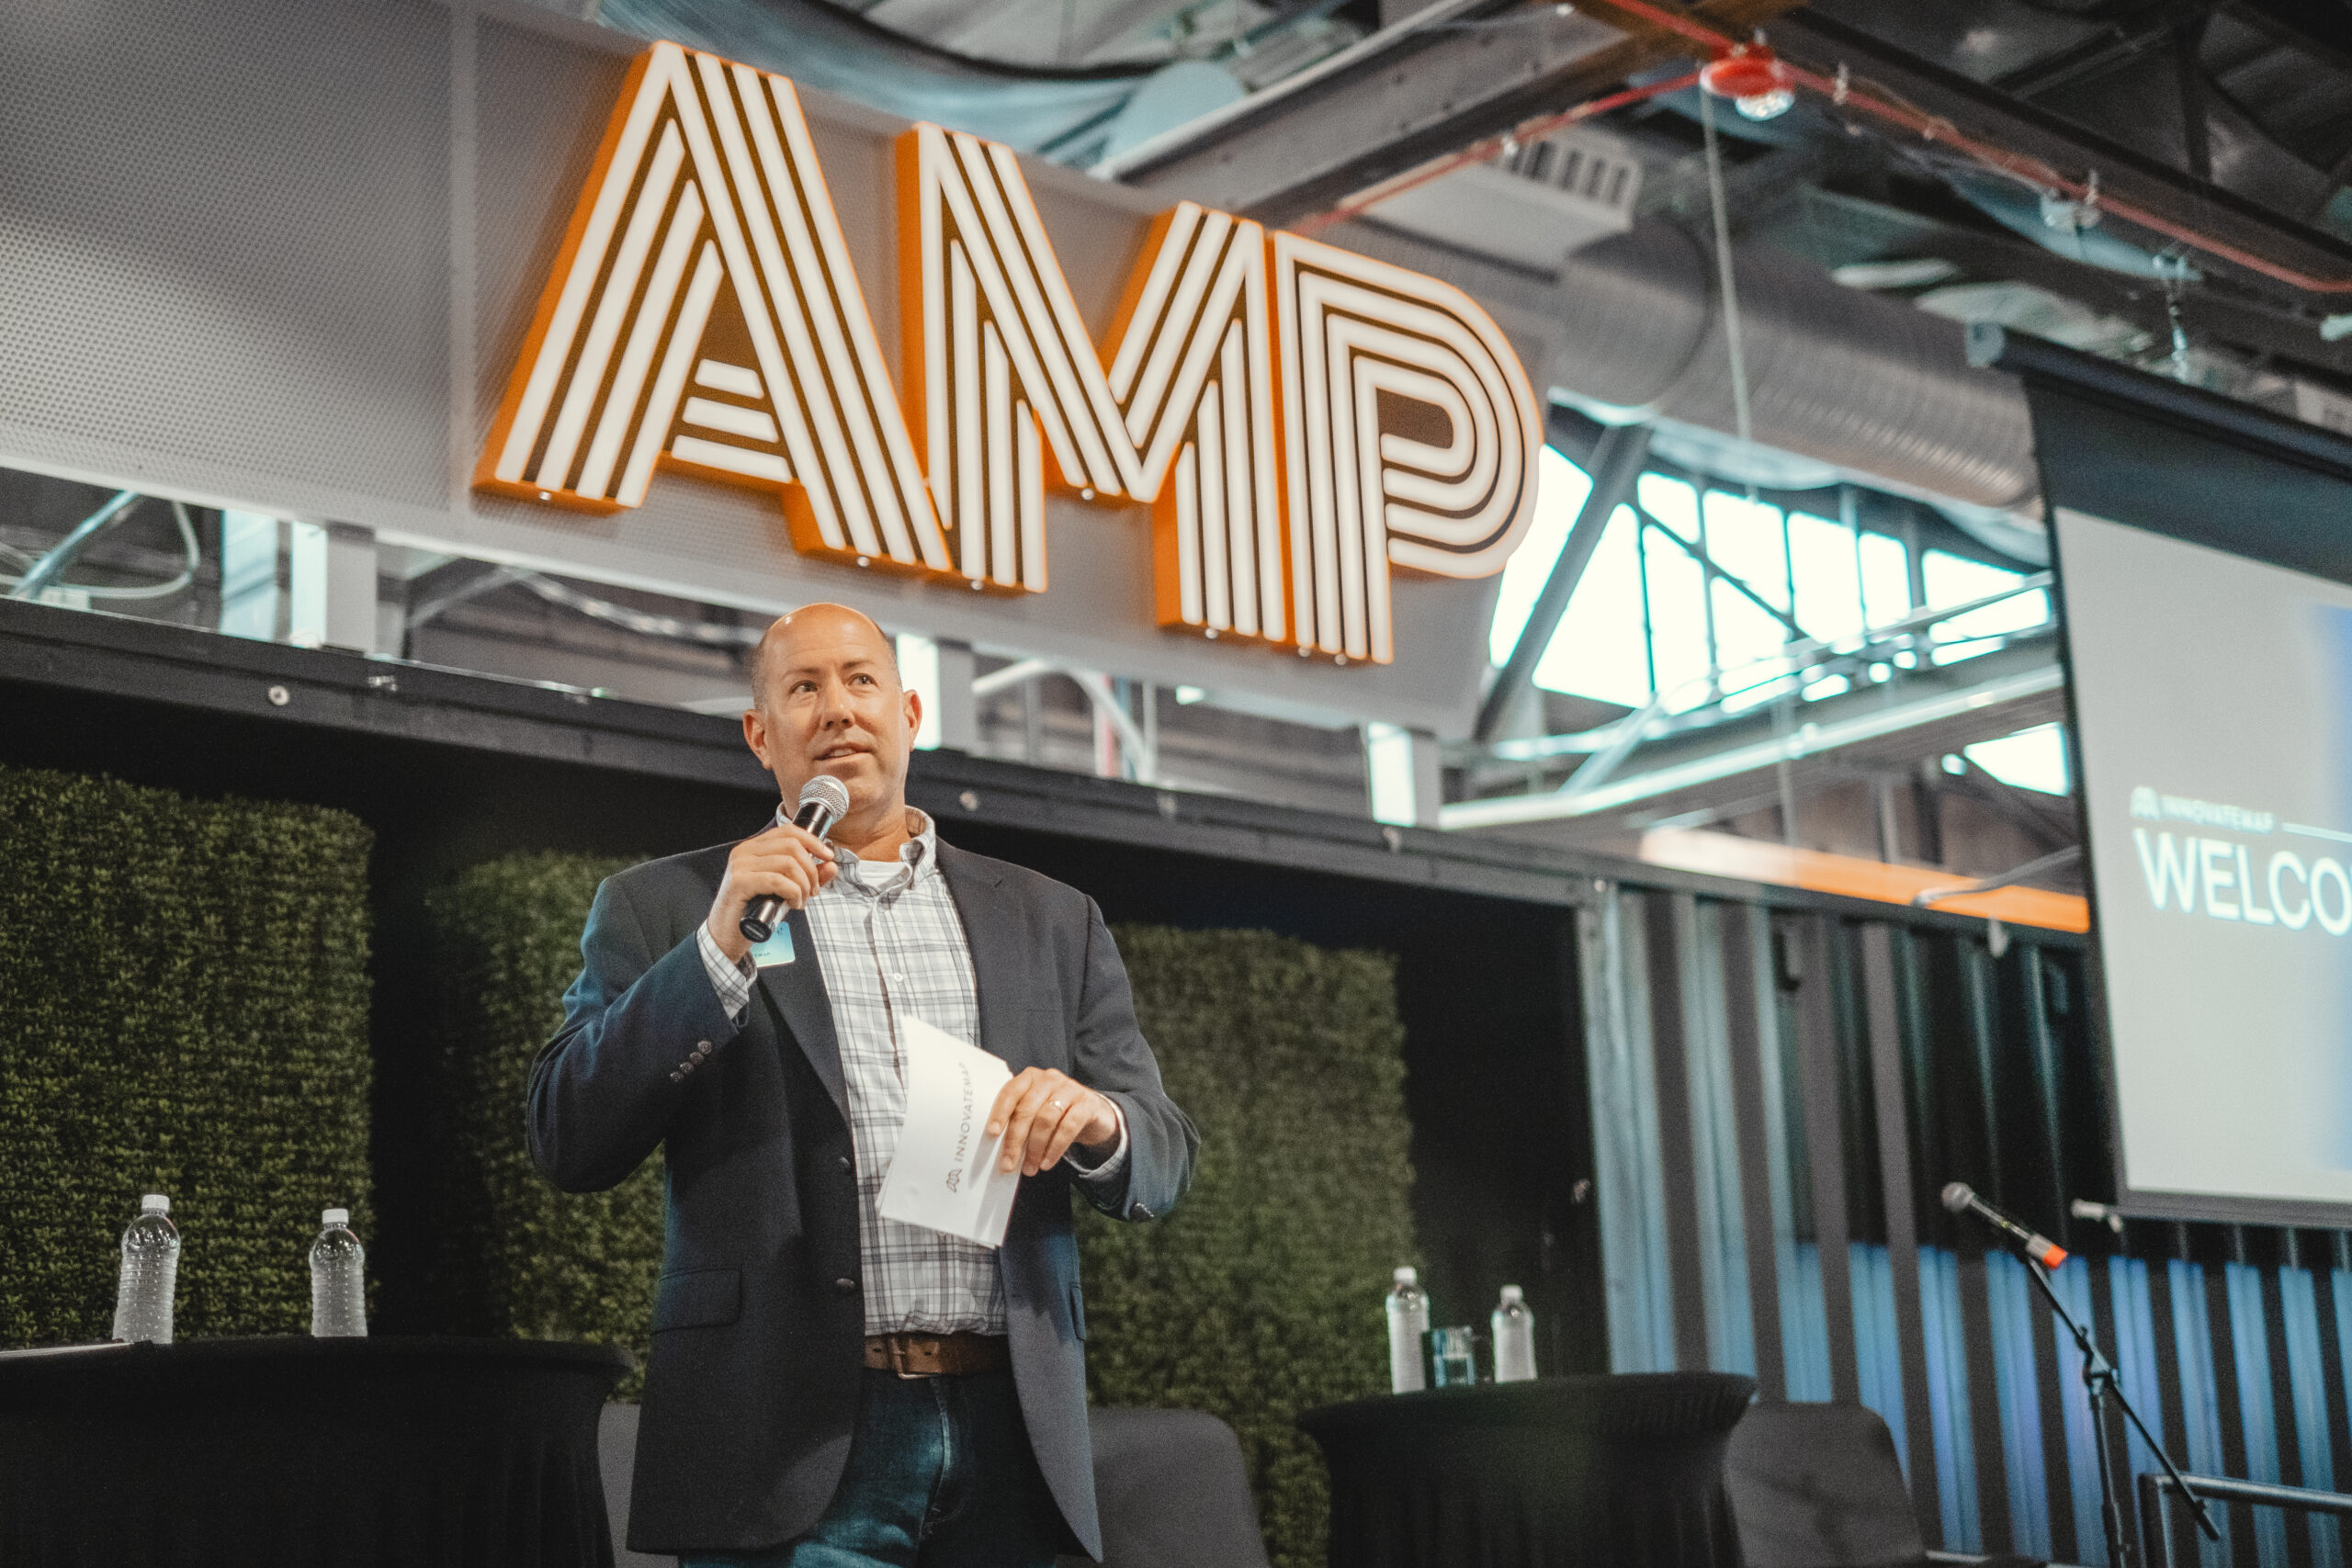 CEO Mike Reynolds welcoming founders and tech leaders to Innovatemap's event at The AMP in Indianapolis.